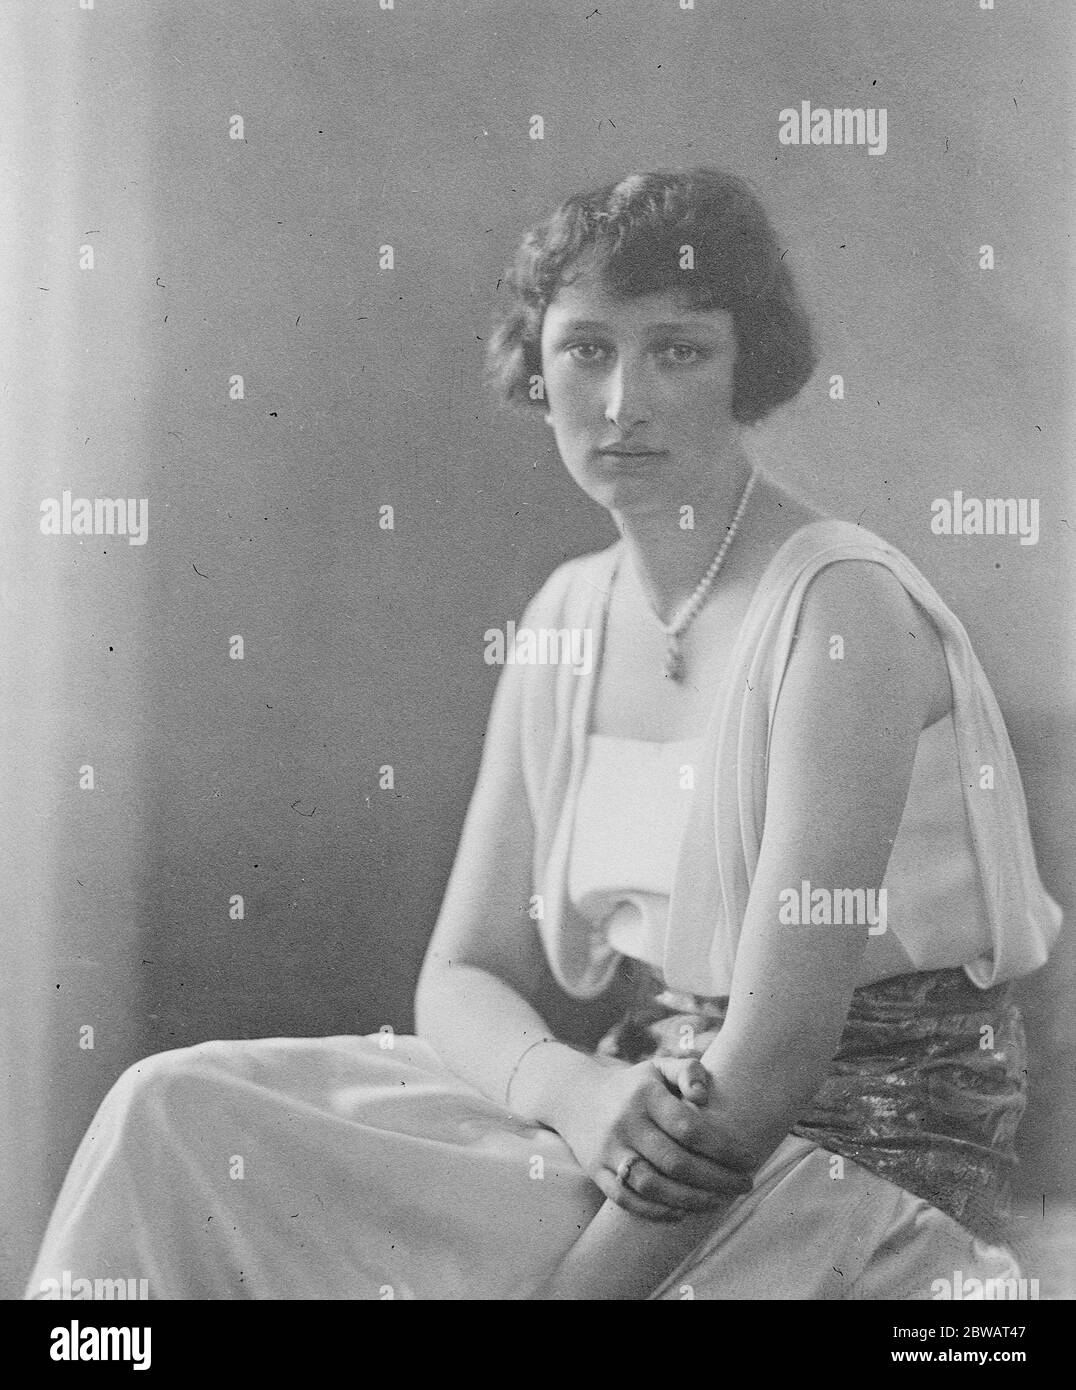 Princess Martha of Sweden second daughter of Prince and Princess Carl , who has bobbed her hair , as seen in the photograph 8 September 1922 Stock Photo